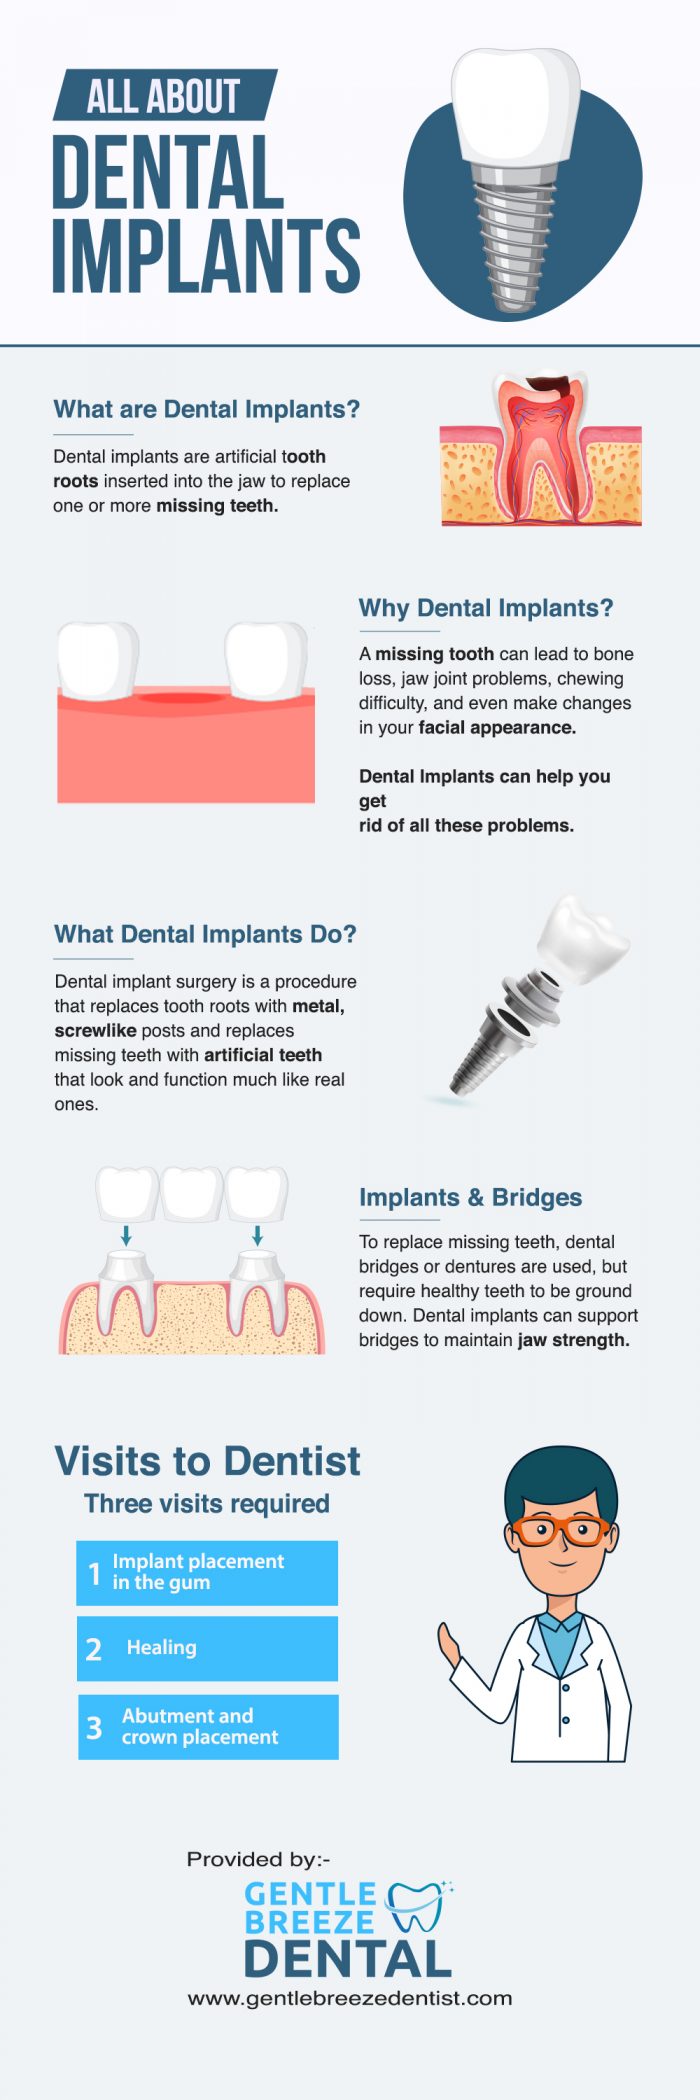 Restore Your Smiles With Dental Implants In Port St Lucie, FL at Gentle Breeze Dental